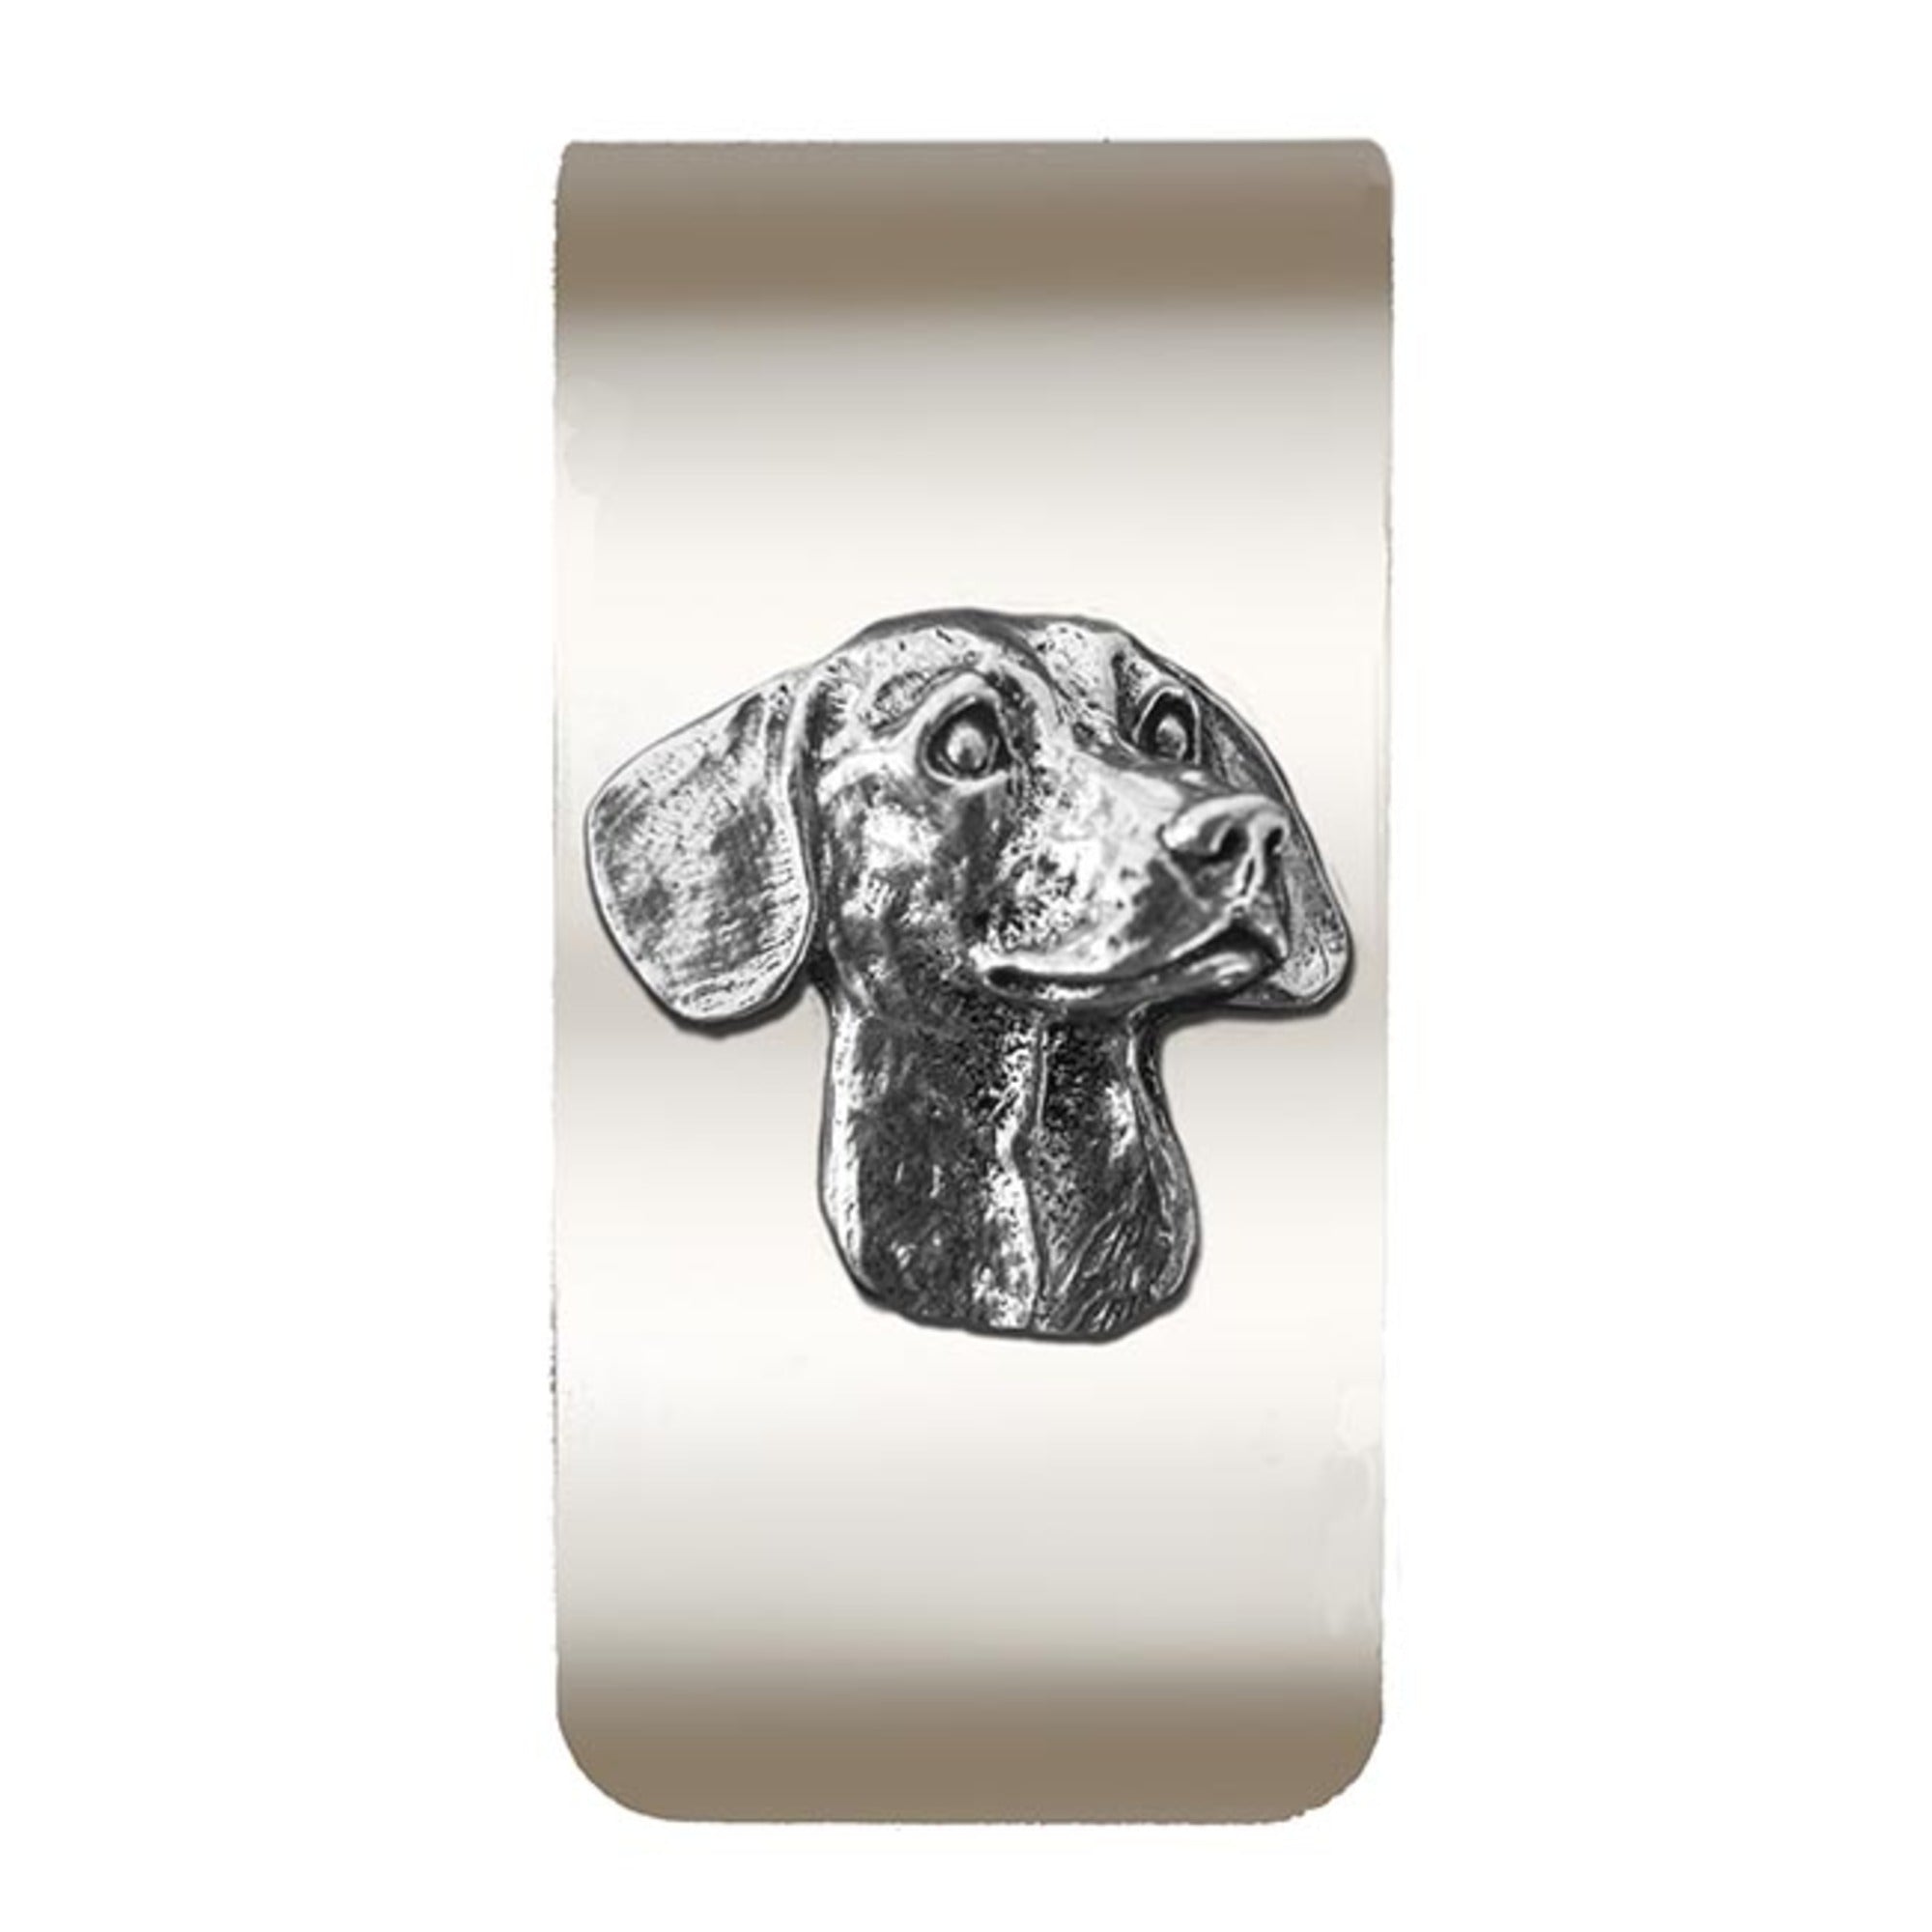 New-Spin Metal Casting Dachshund Money Clip